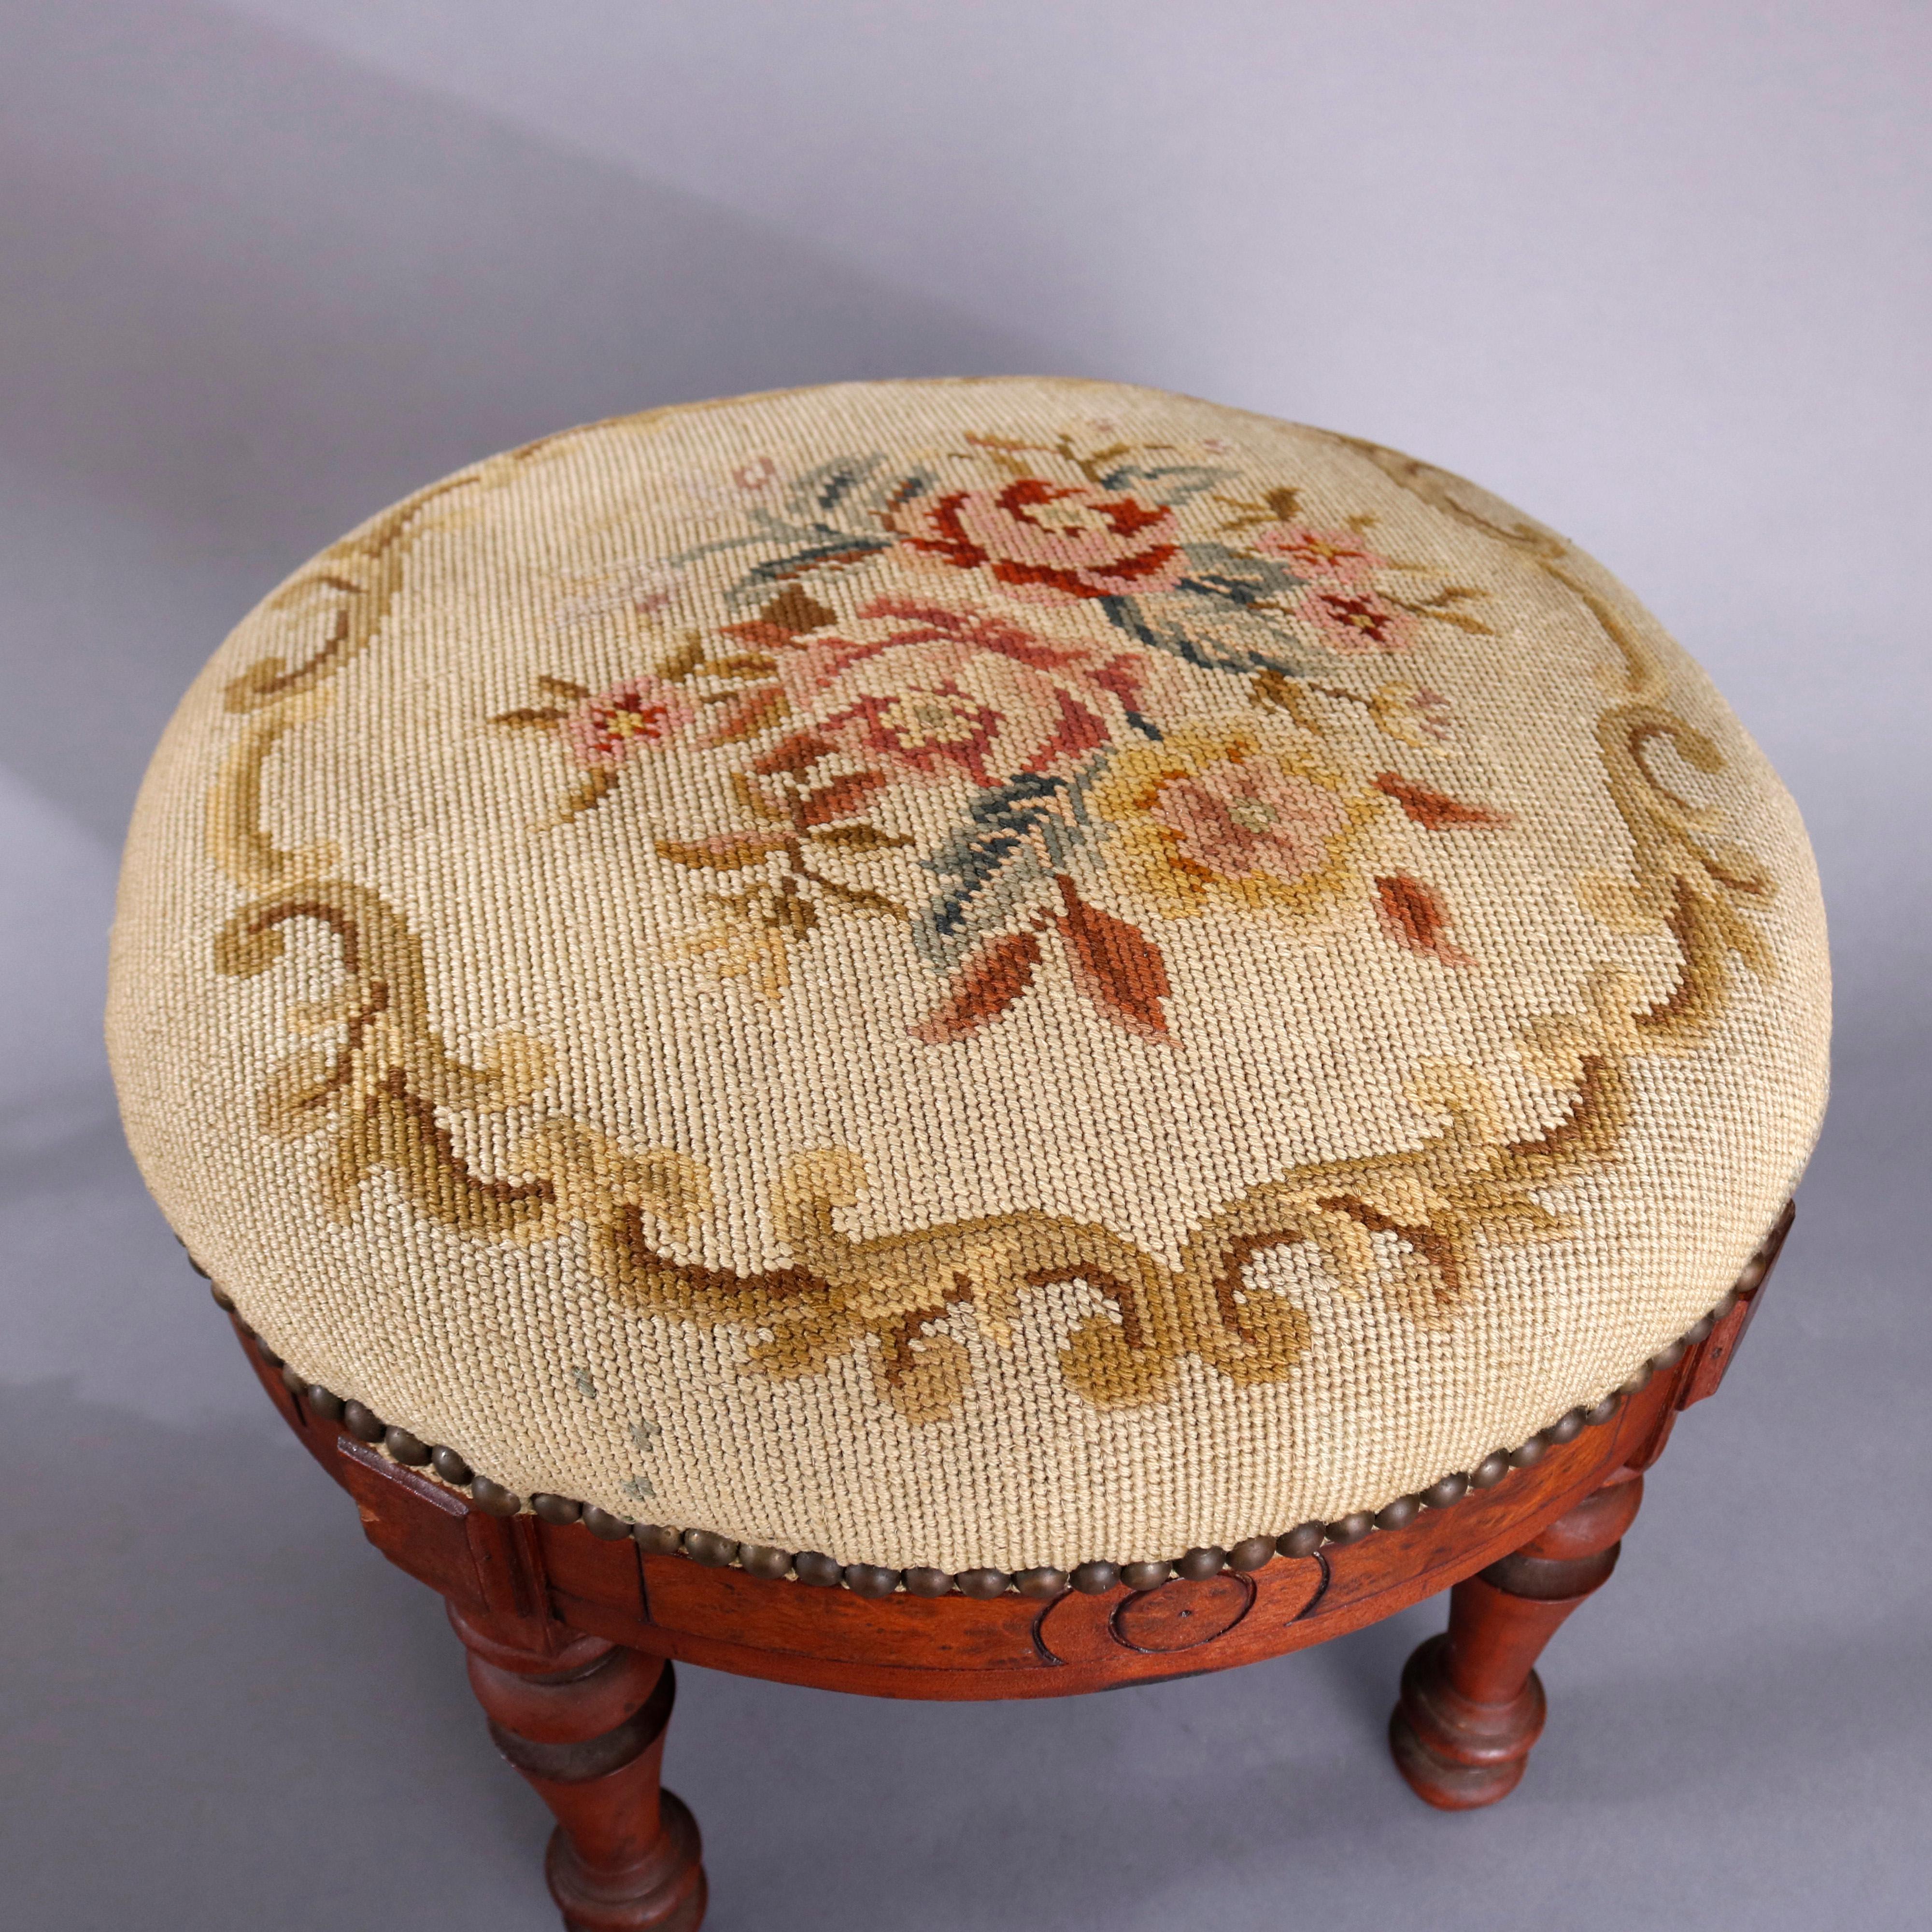 An antique Eastlake footstool offers found form with floral needlepoint seat surmounting carved walnut base with burl panels and raised on turned legs, circa 1890

Measures- 15.5